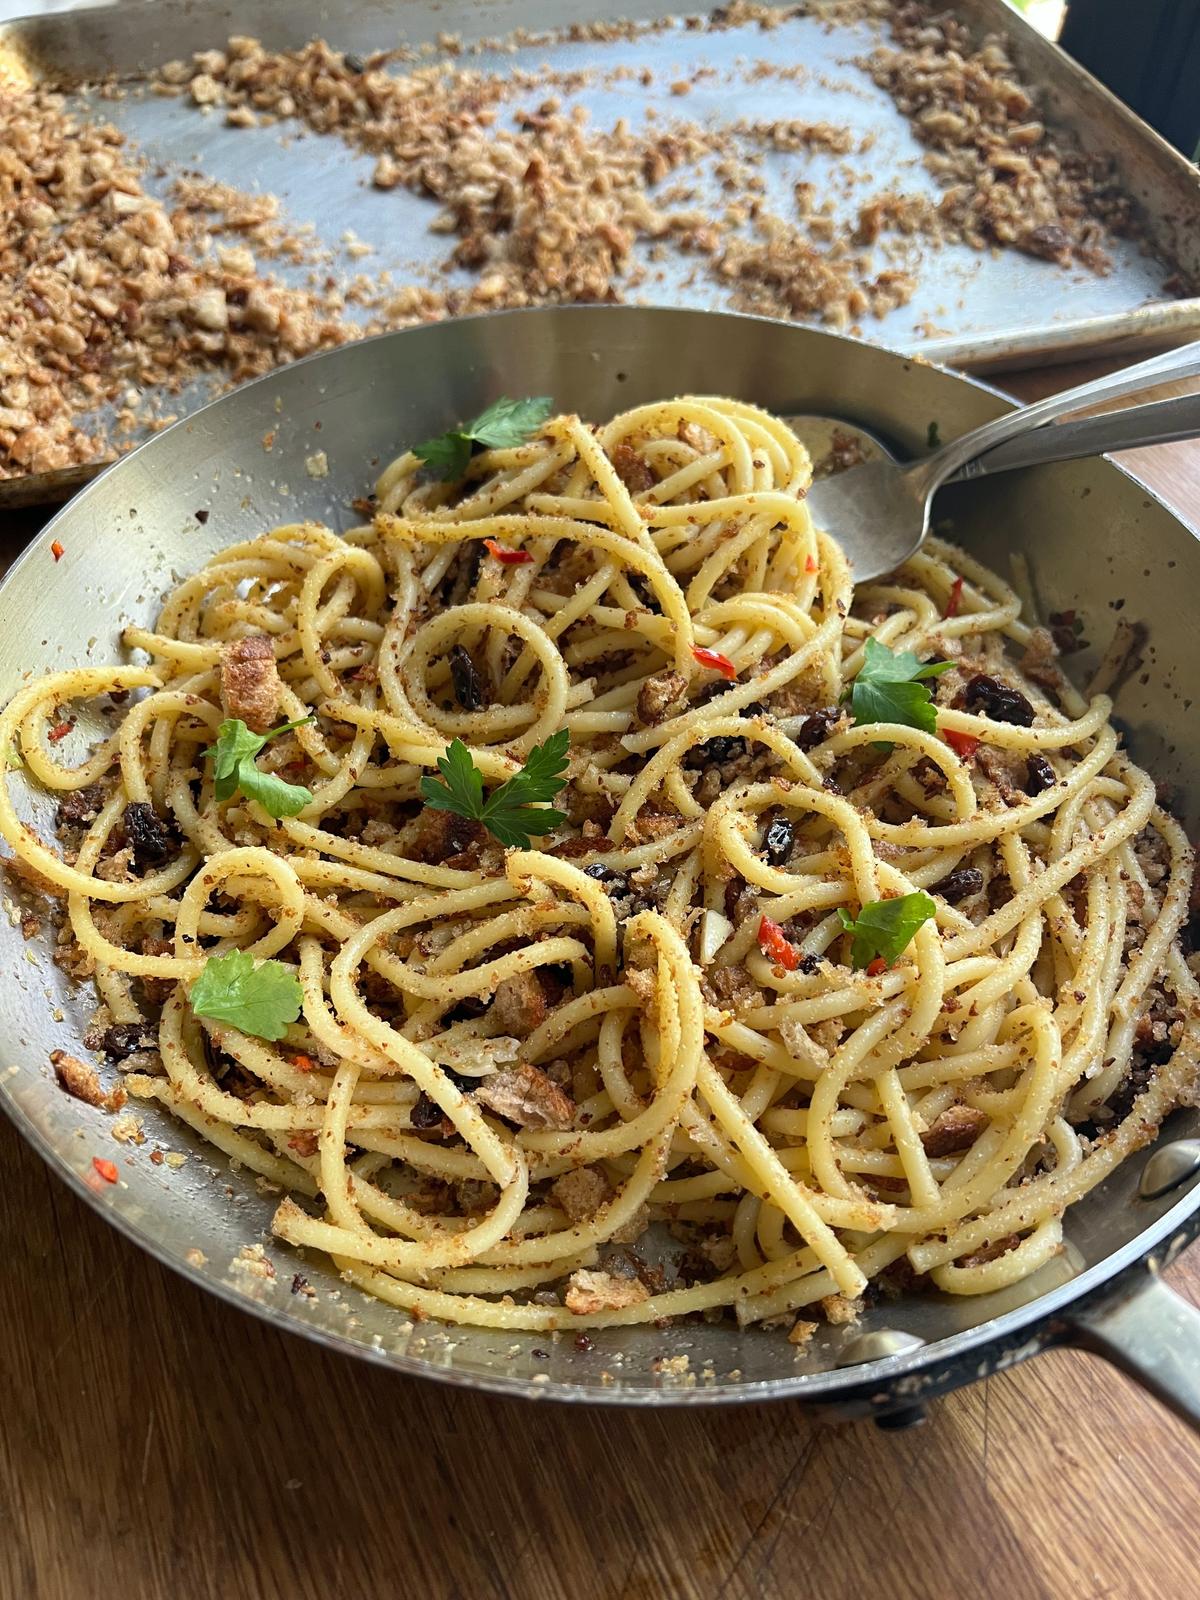 This minimalist Sicilian recipe for pasta with breadcrumbs and raisins is sweet, spicy and crunchy. (Gretchen McKay/Pittsburgh Post-Gazette/TNS)